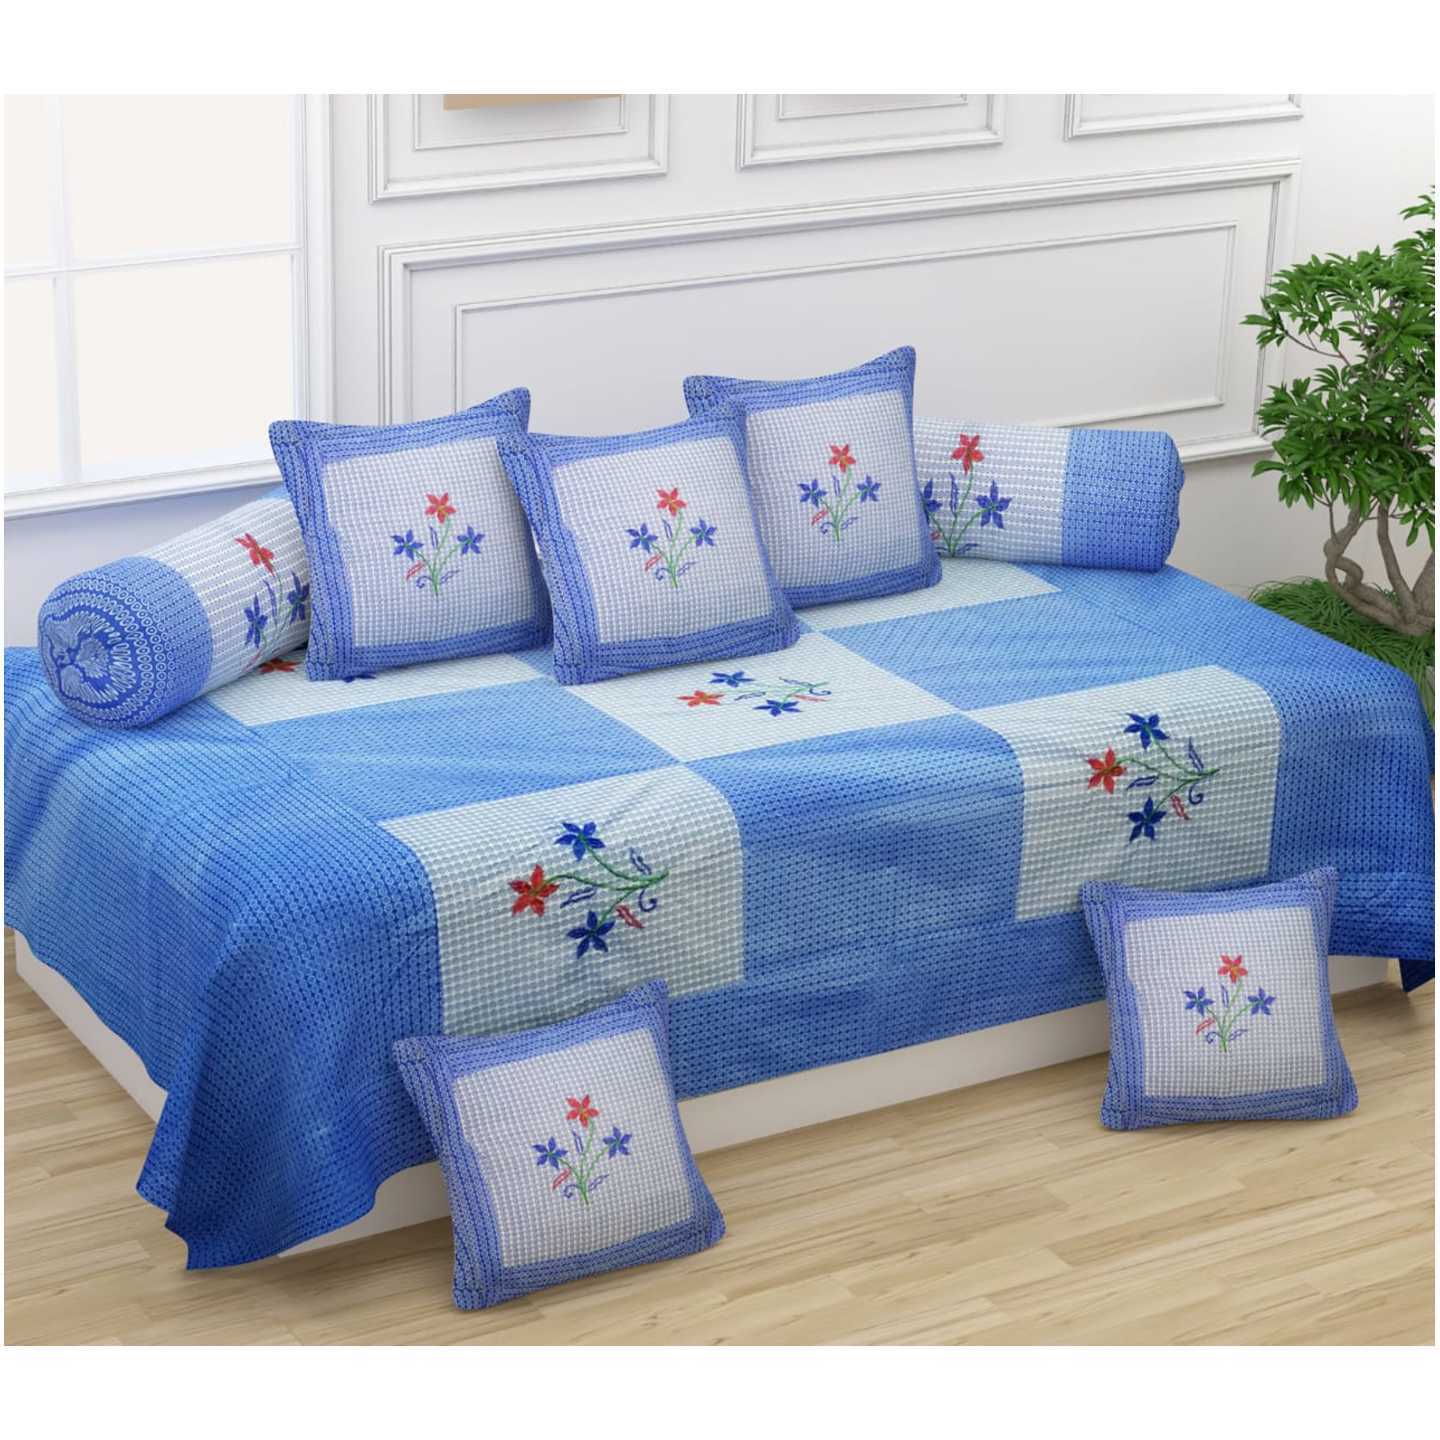 Handtex Home Cotton Fabric Embroidery Design Diwan Set Covers 8 Pcs Set of 1 Bedsheet 2 Bolsters and 5 Cushion Covers (Blue)